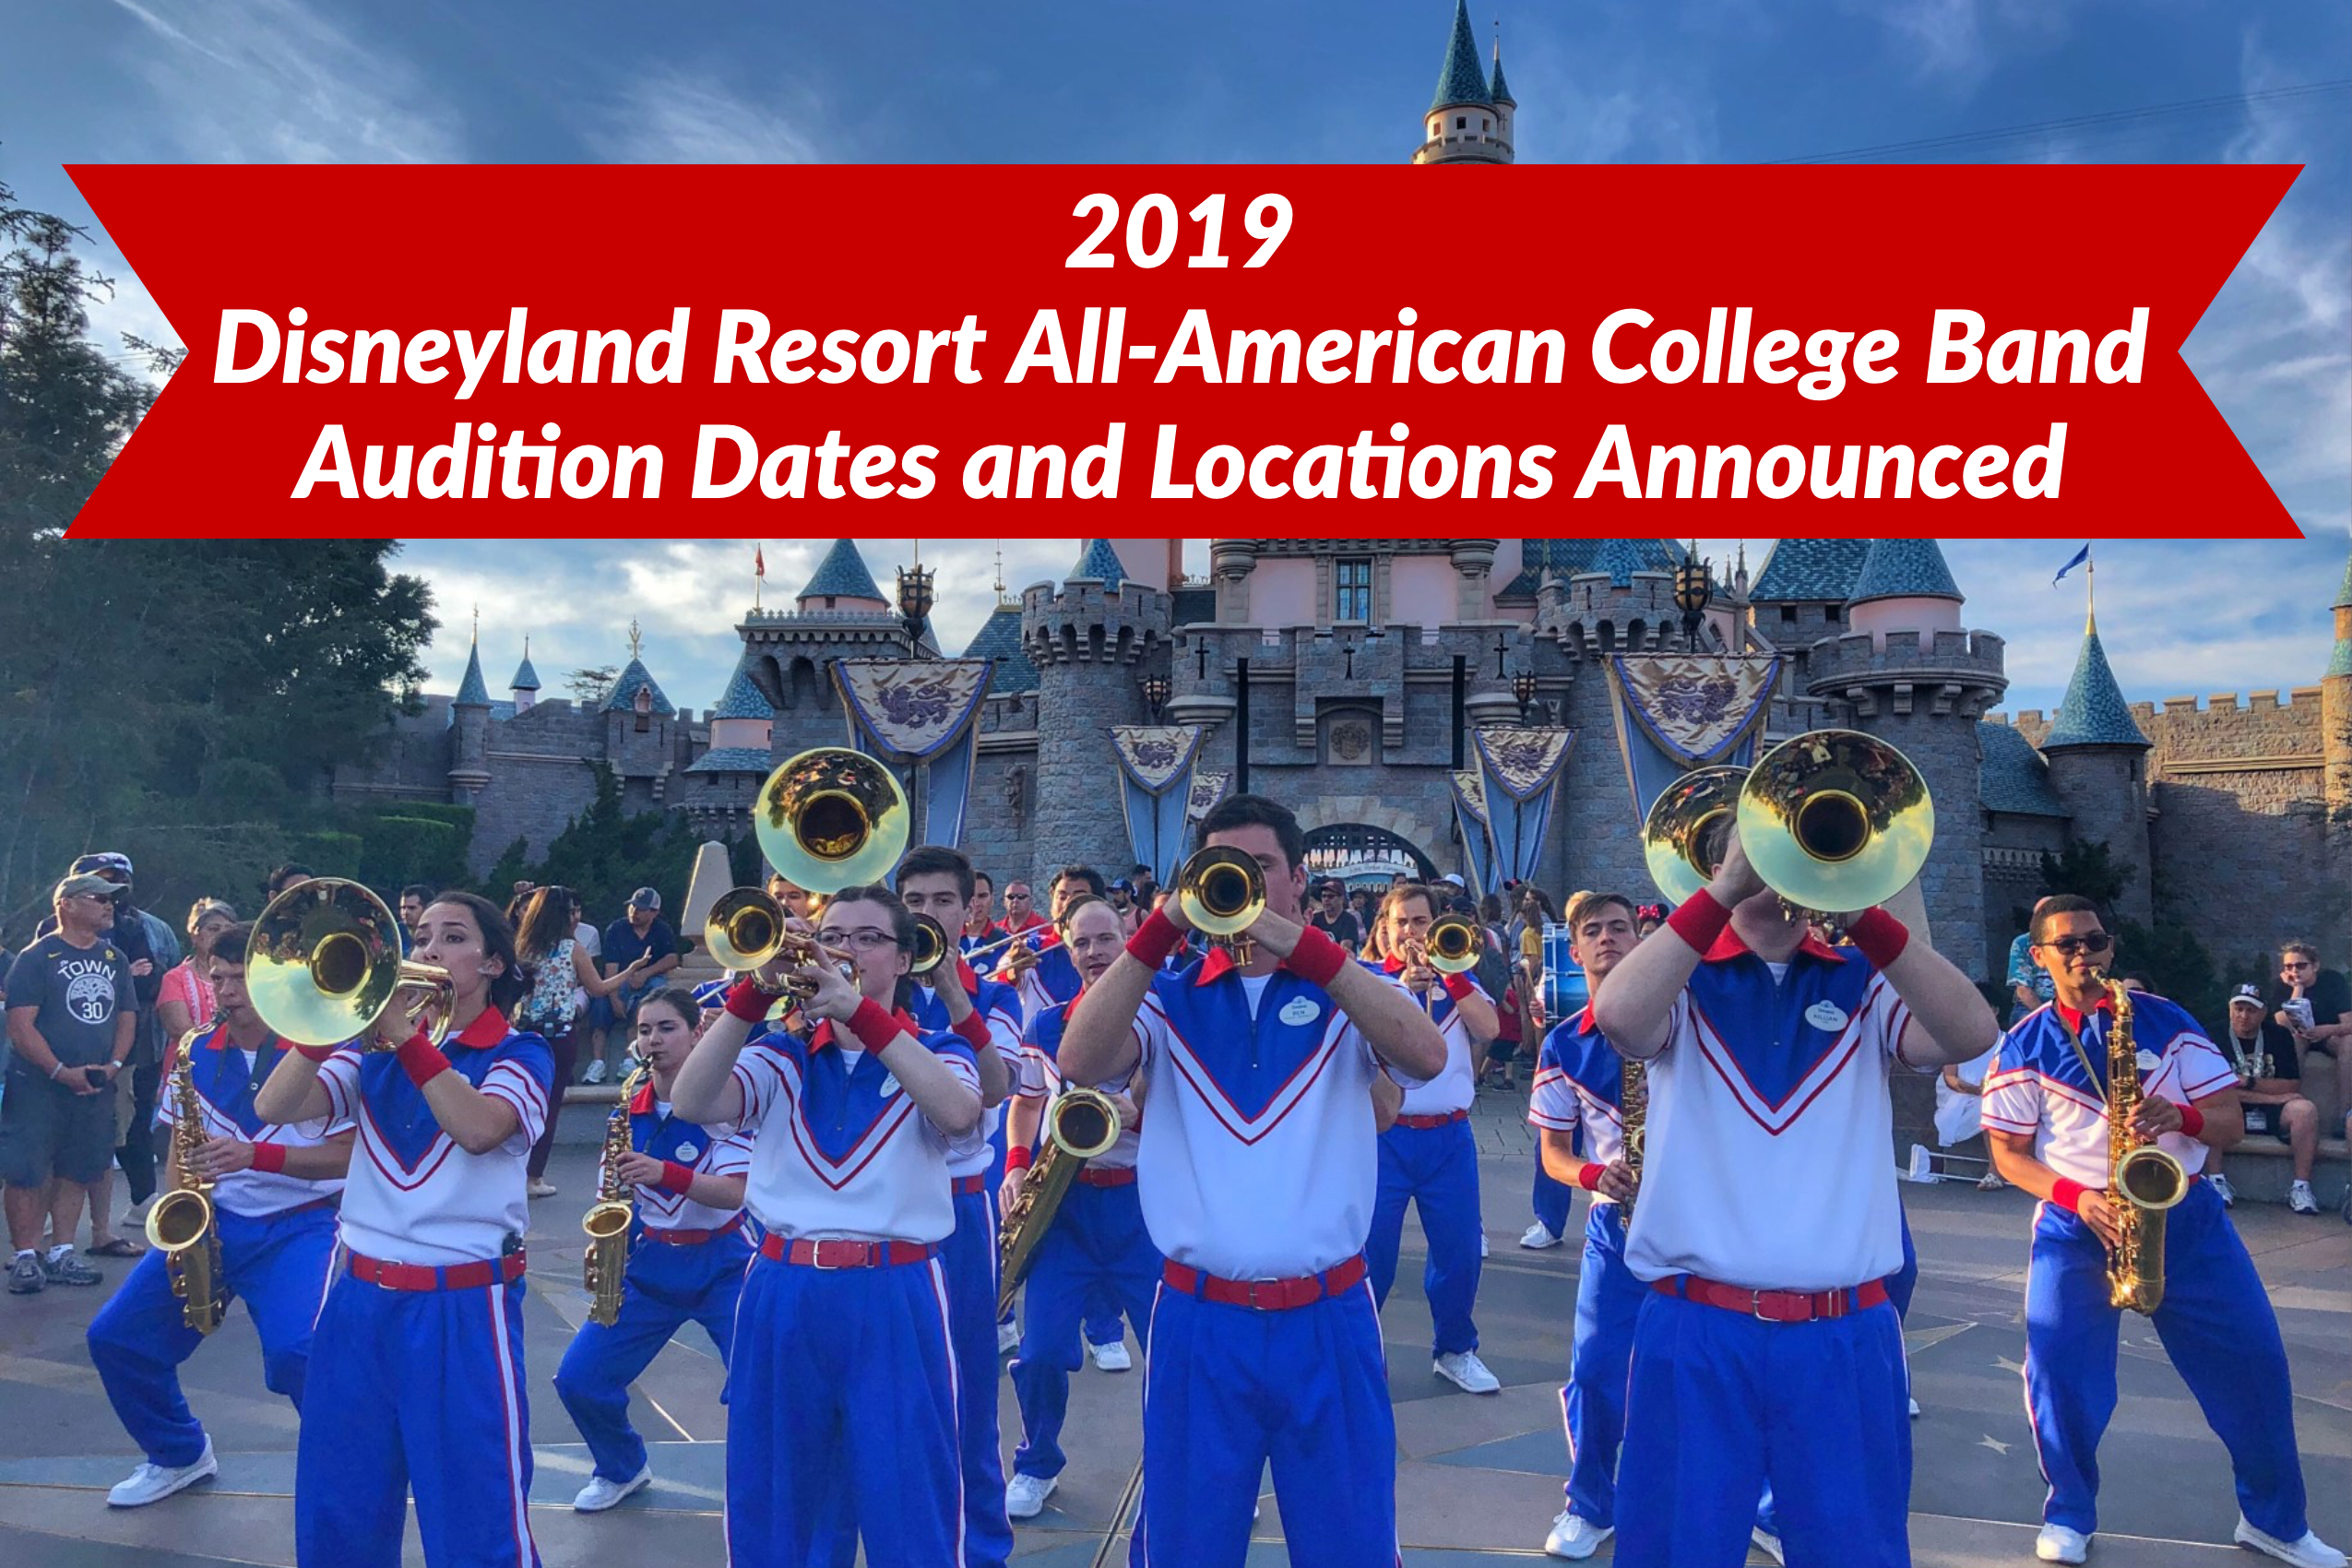 Audition Dates Announced for the 2019 Disneyland Resort All-American College Band